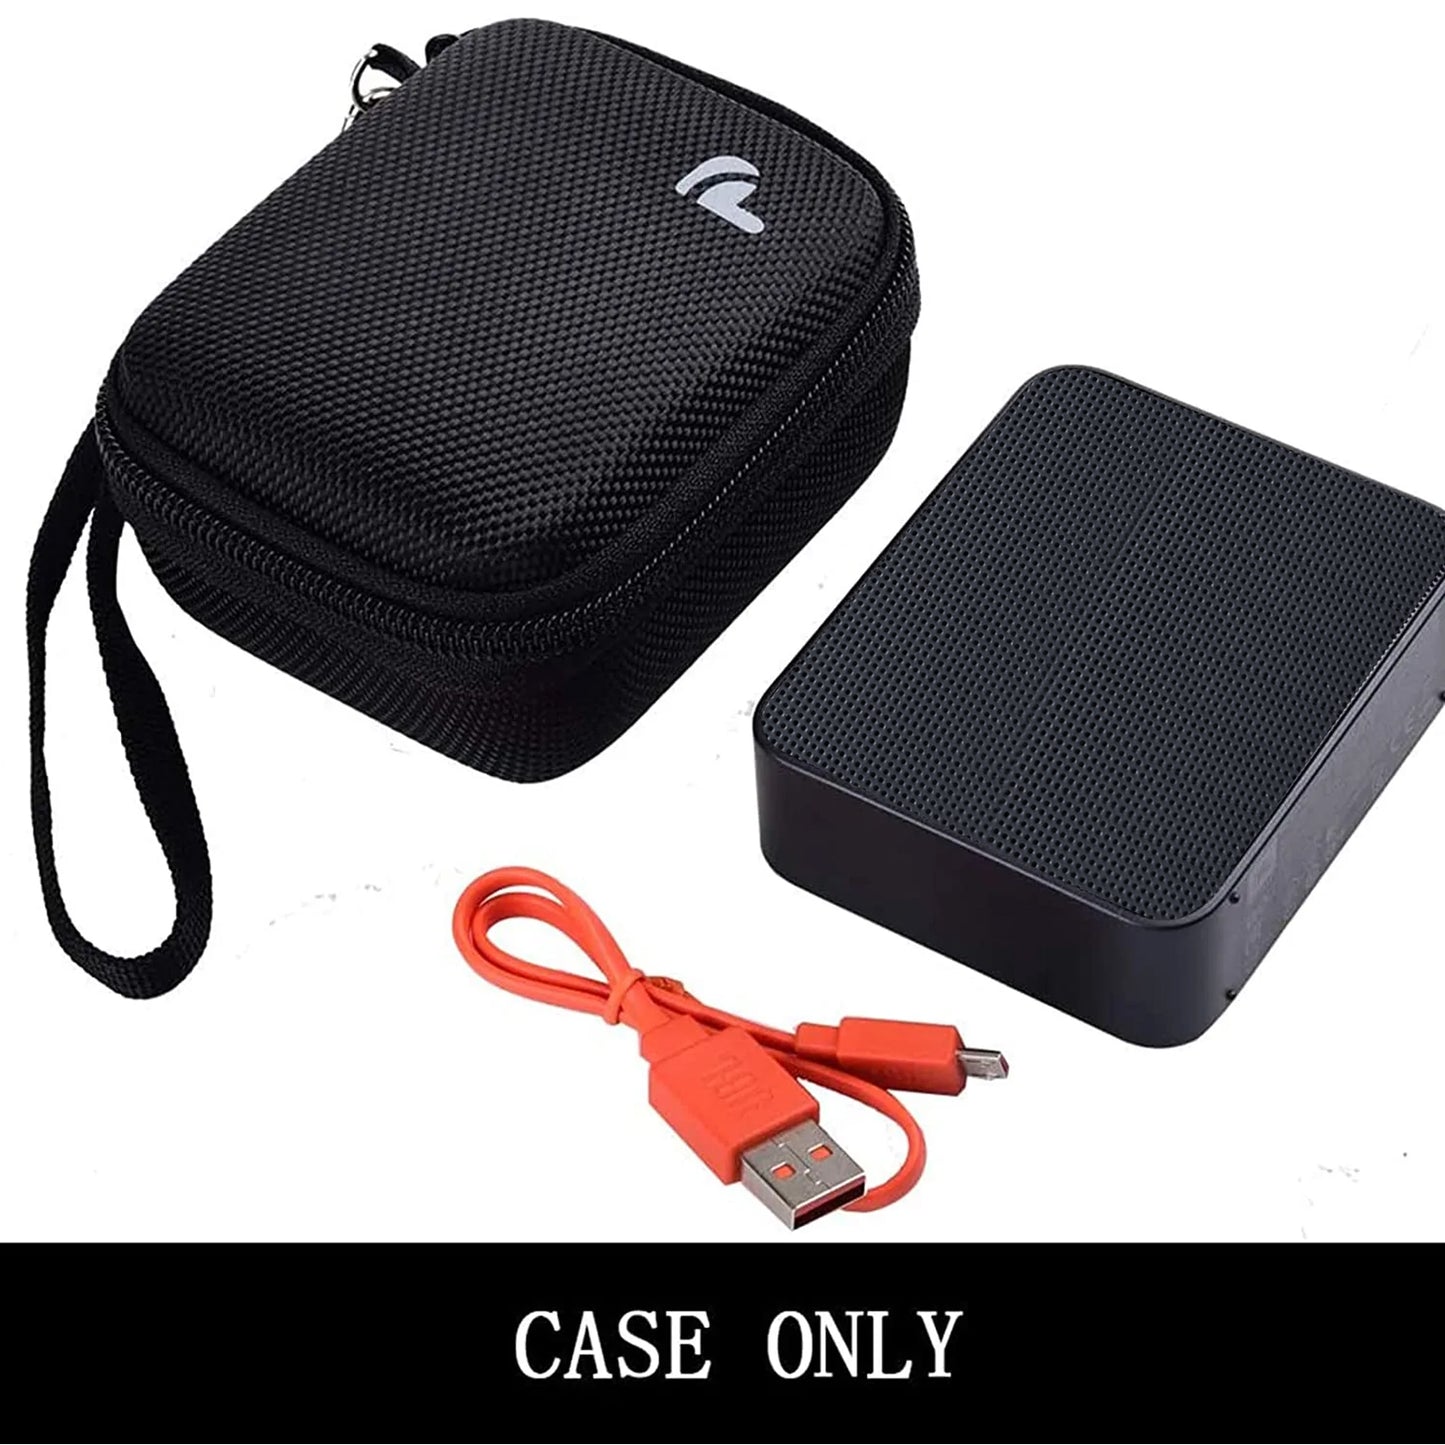 Case Compatible for JBL GO 2/ for JBL GO Portable Bluetooth Waterproof Speaker, Travel Storage Bag Holder Fits for USB Cable and Charger. (Speaker and Accessories not Includes)-Black